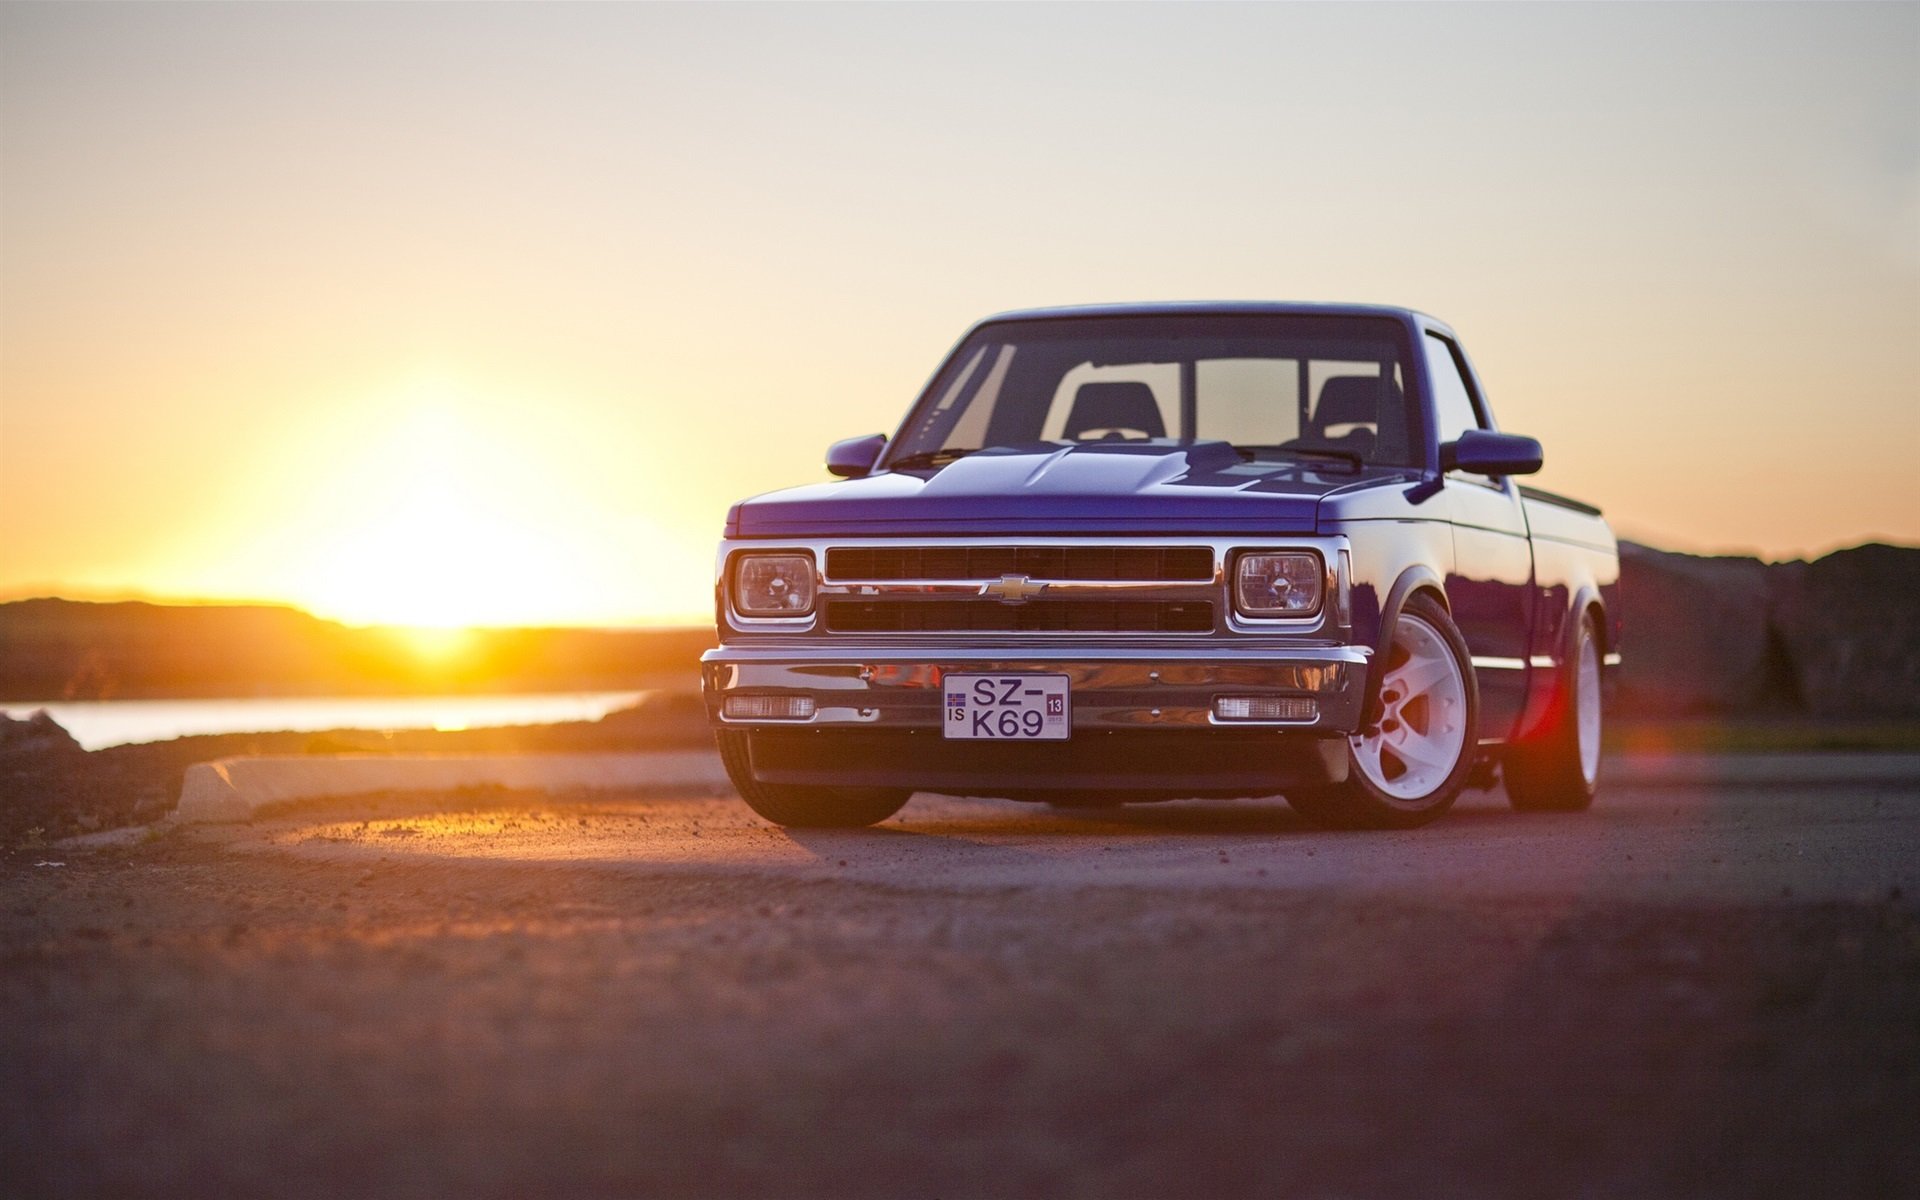 Chevrolet S10 Pickup, Sunset 640x1136 IPhone 5 5S 5C SE Wallpaper, Background, Picture, Image